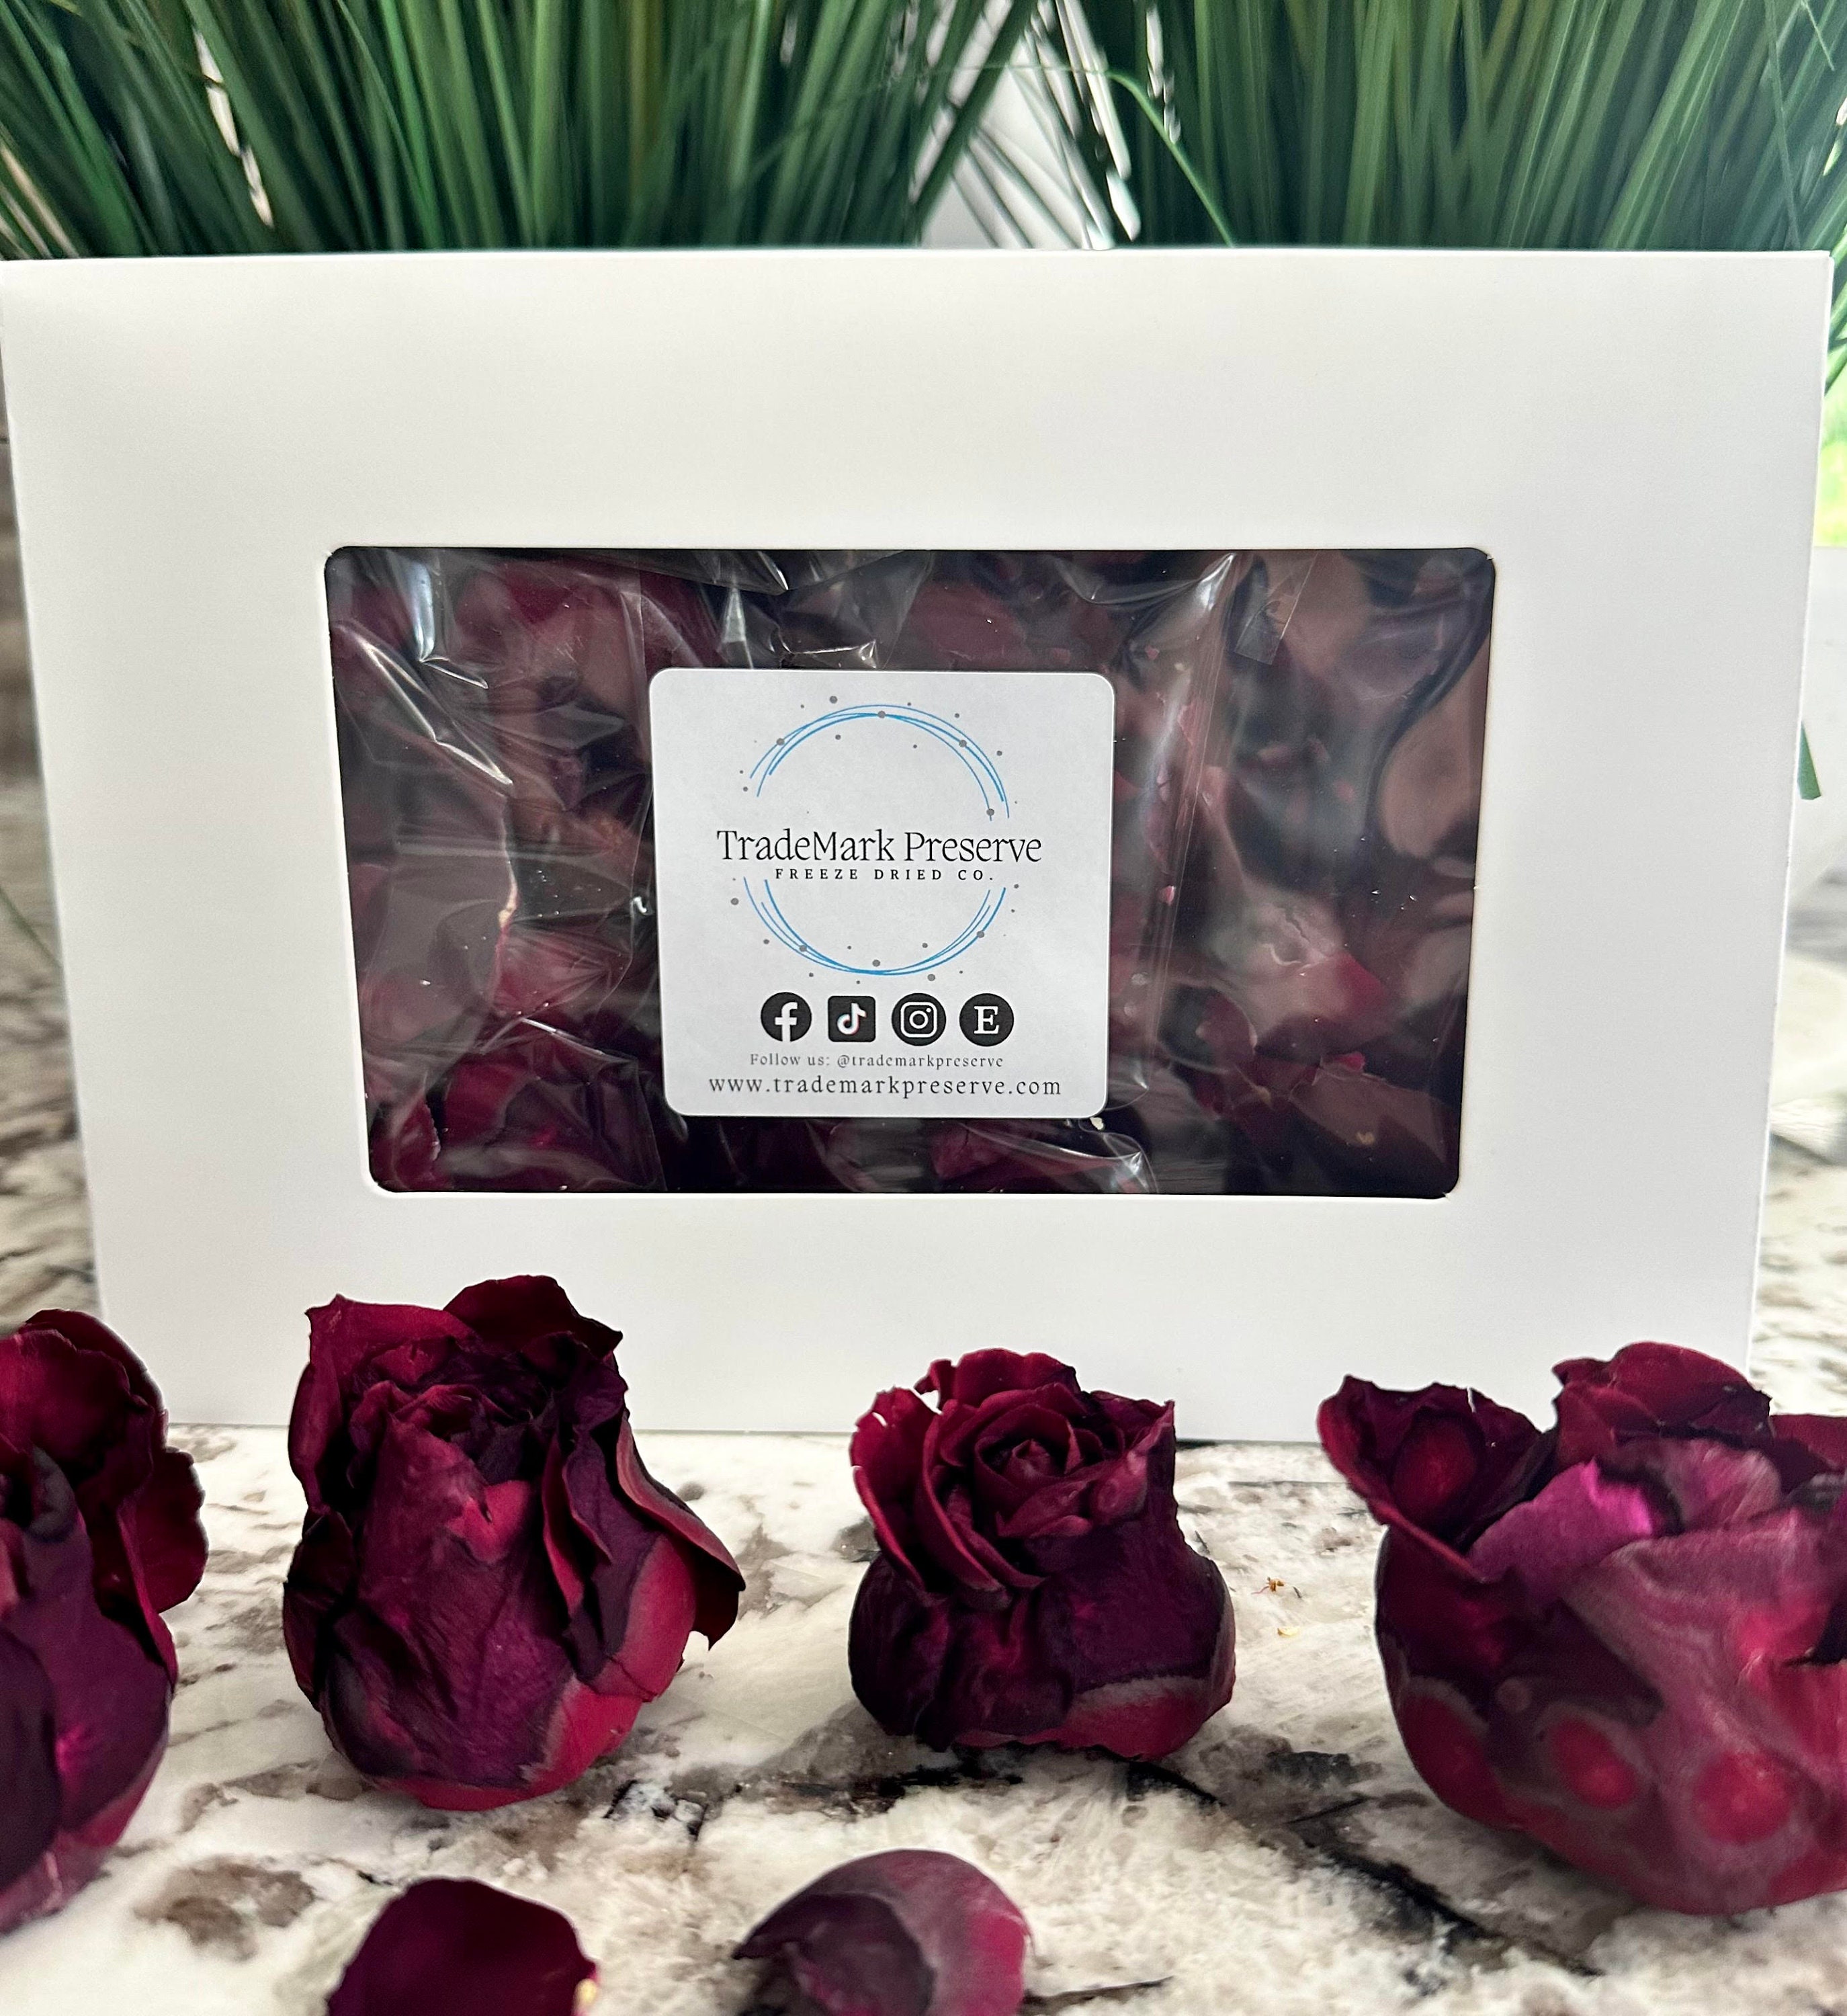 Freeze Dried Rose Petals, Ivory, 10 Cups of REAL Rose Petals for